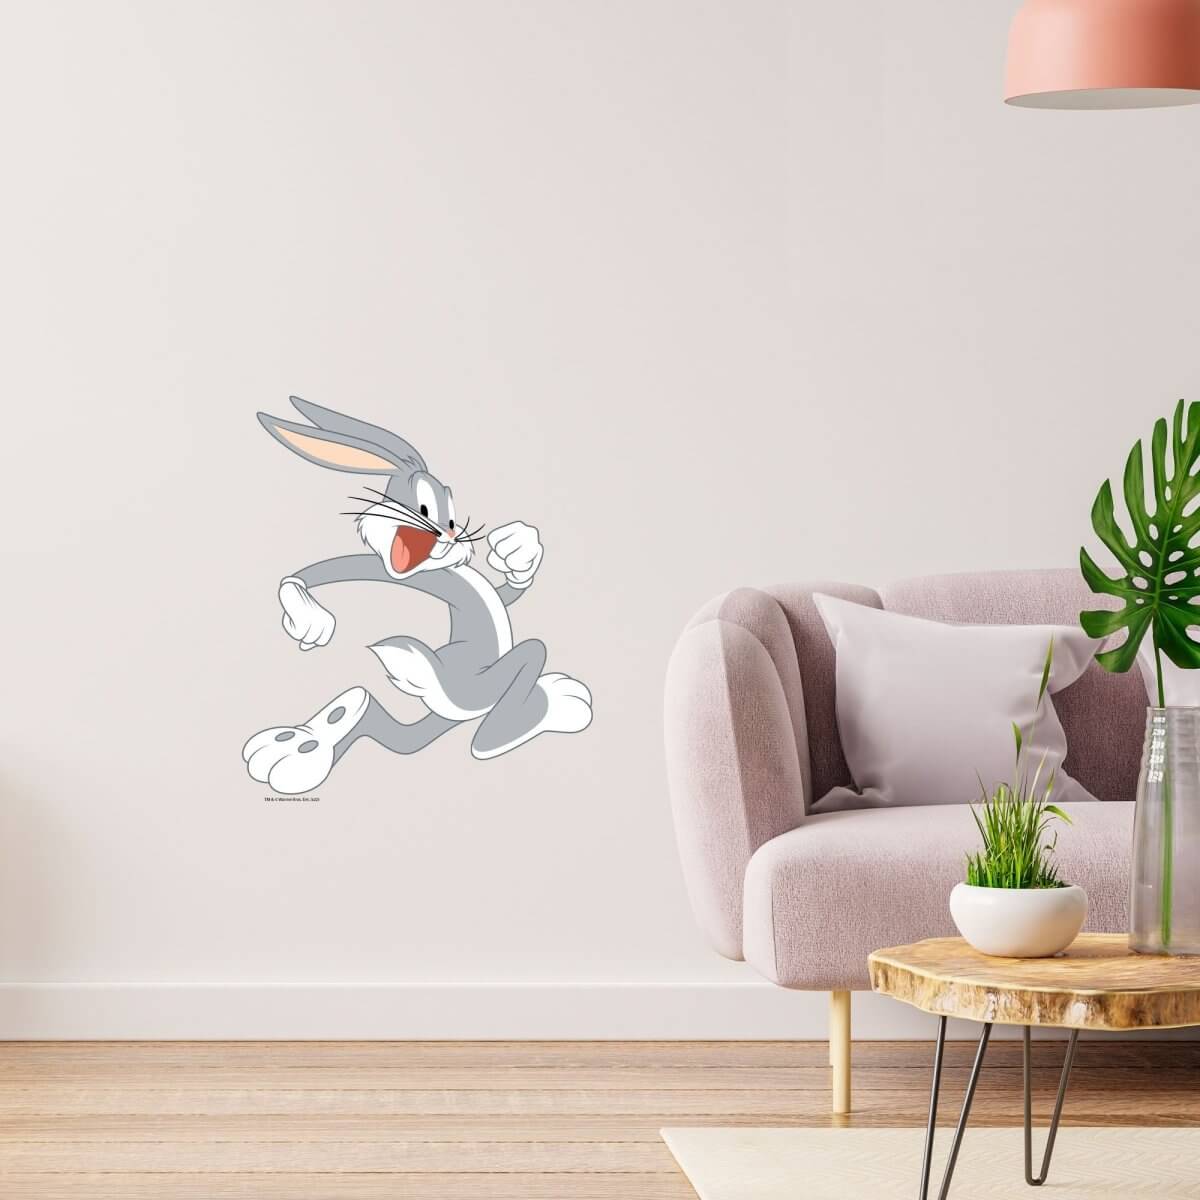 Kismet Decals Looney Tunes Bugs Bunny Escape Licensed Wall Sticker - Easy DIY Home & Kids Room Decor Wall Decal Art - Kismet Decals